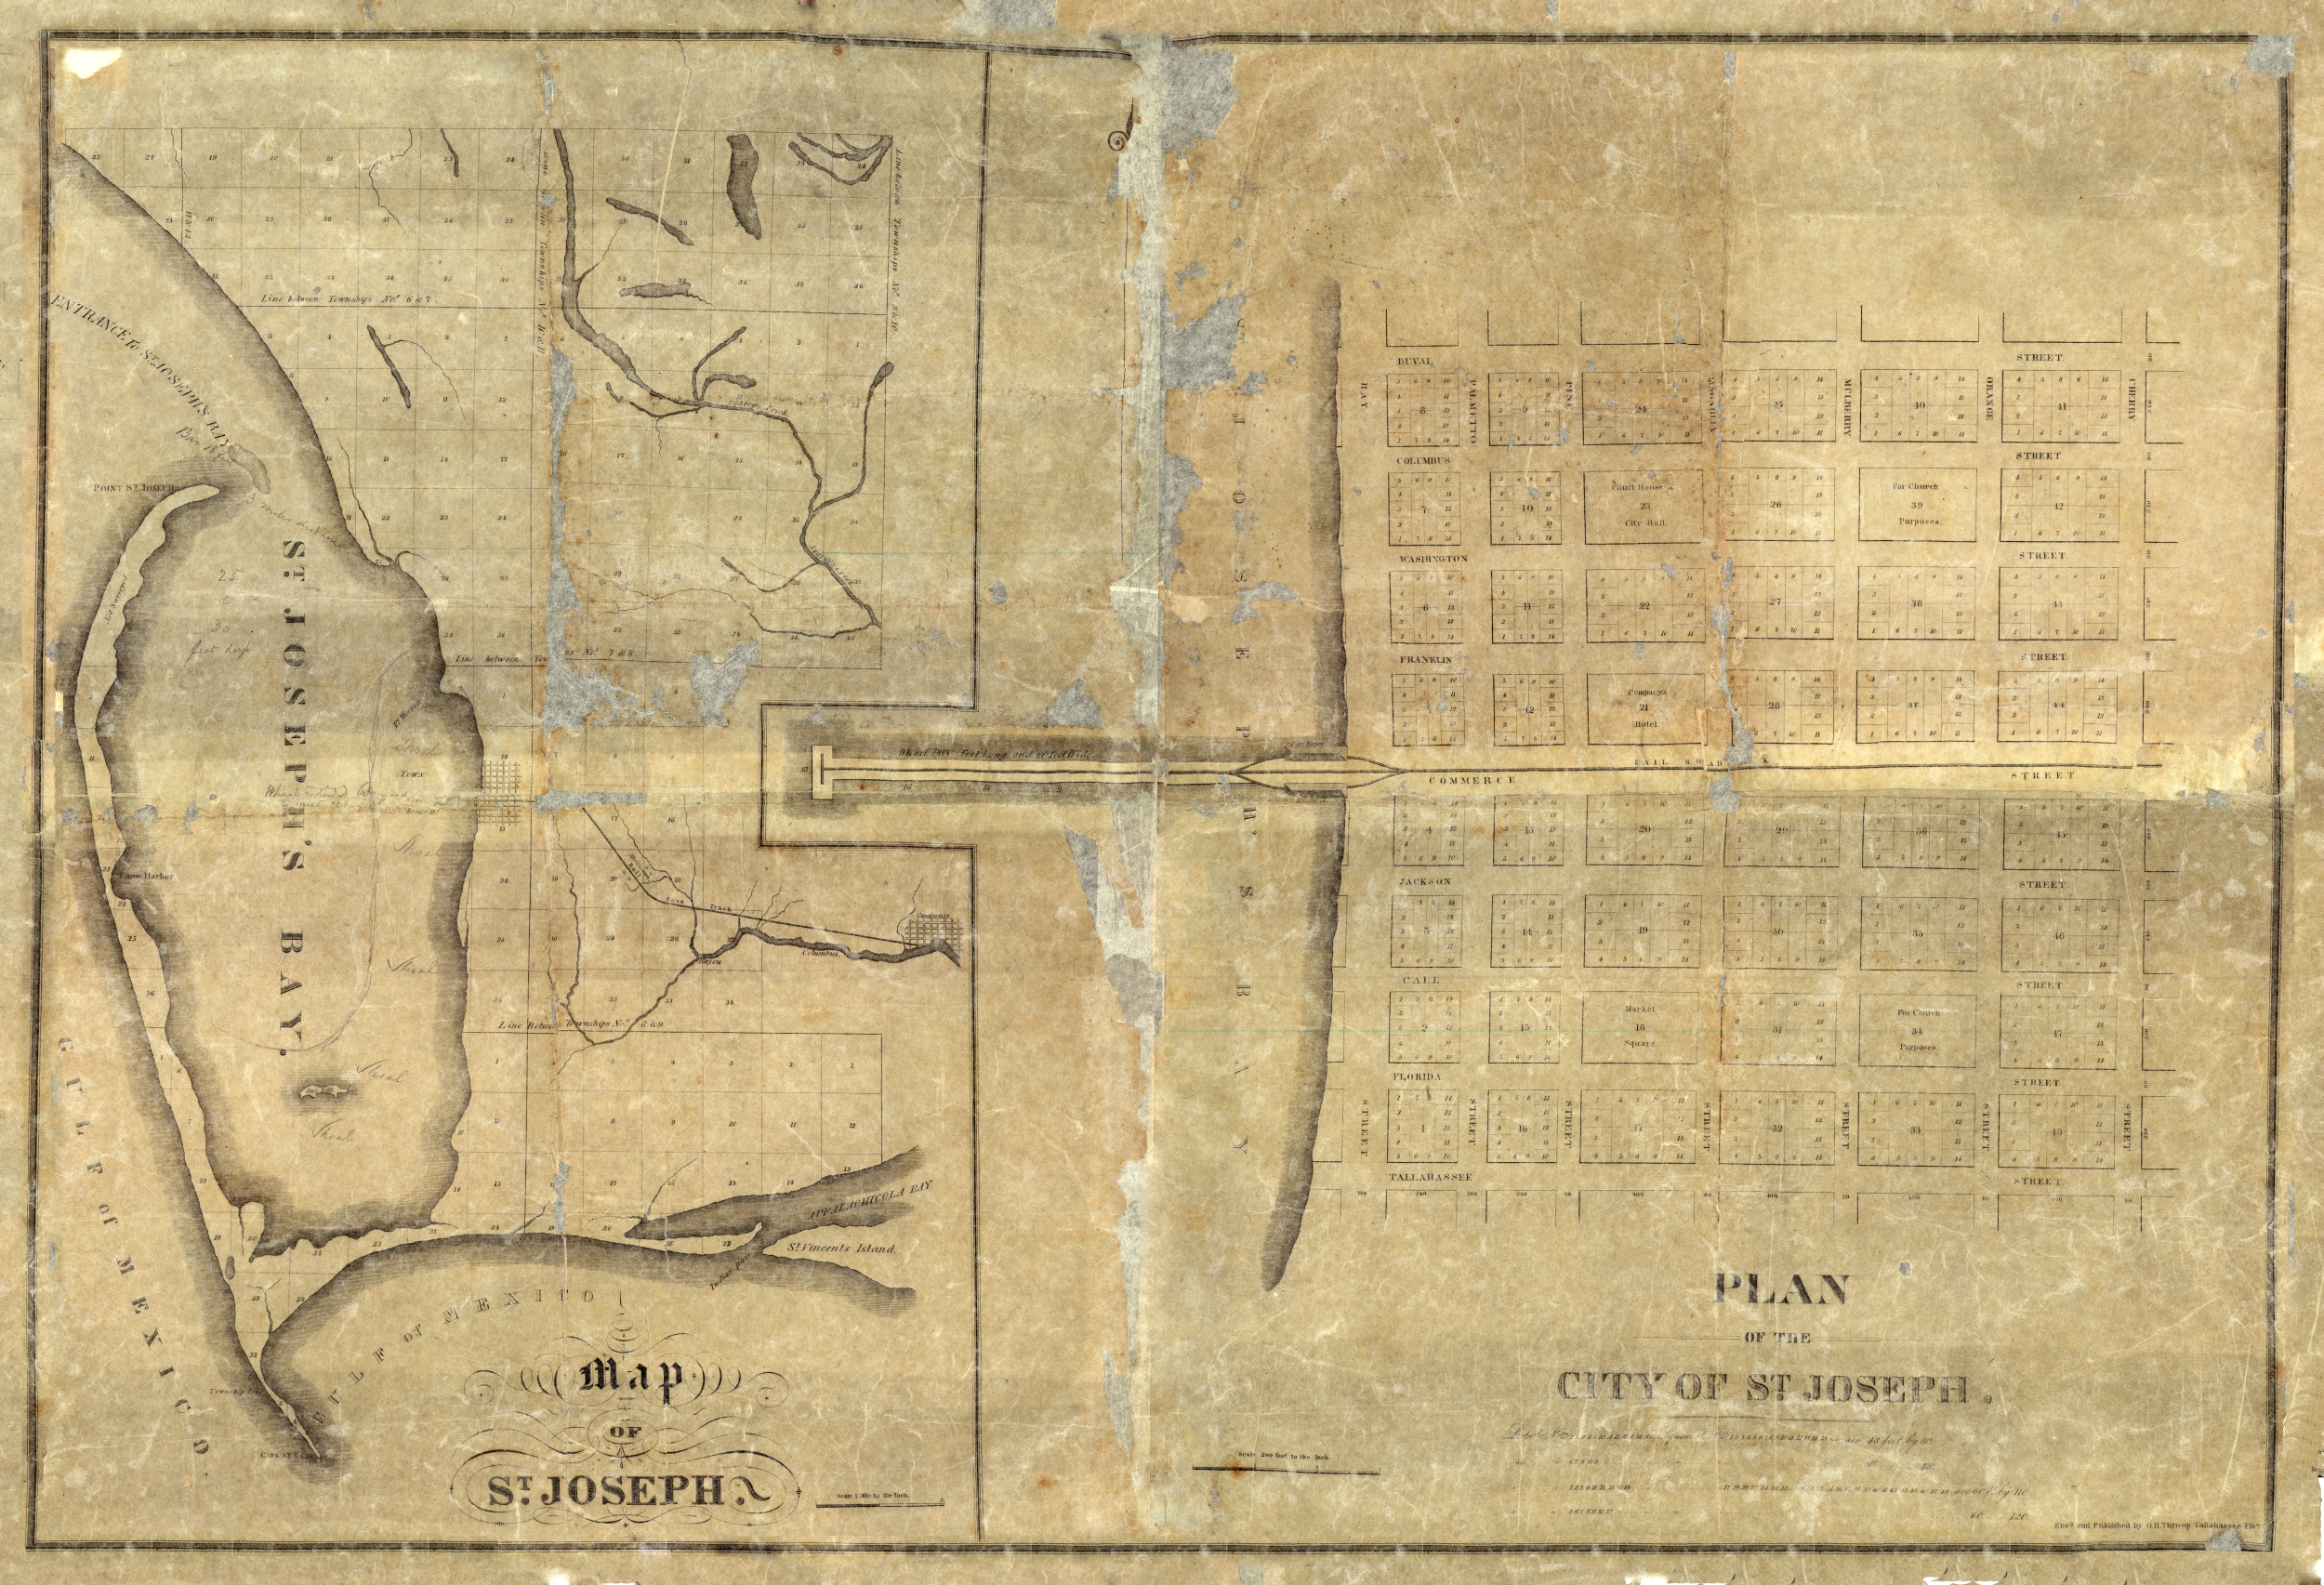 Map and Plan of St. Joseph, 1836